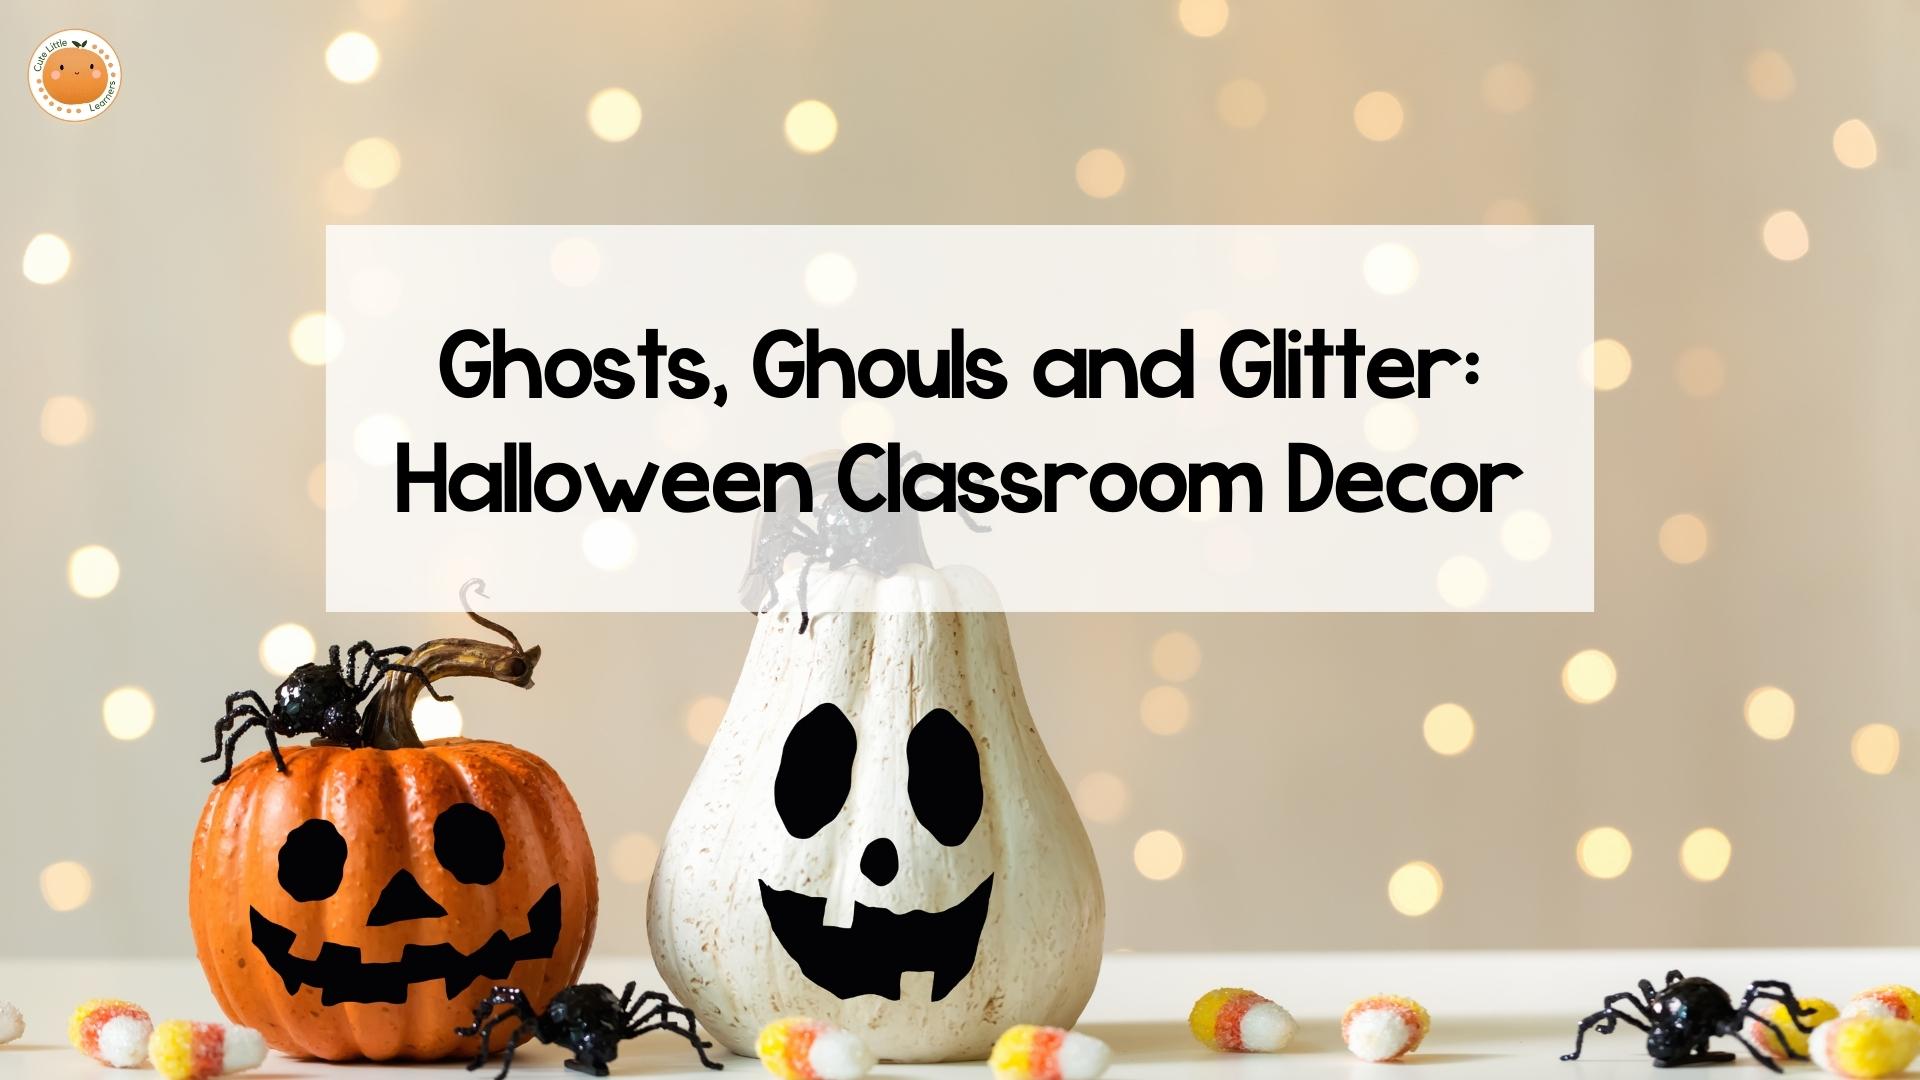 Ghosts, Ghouls and Glitter - Halloween Classroom Decor